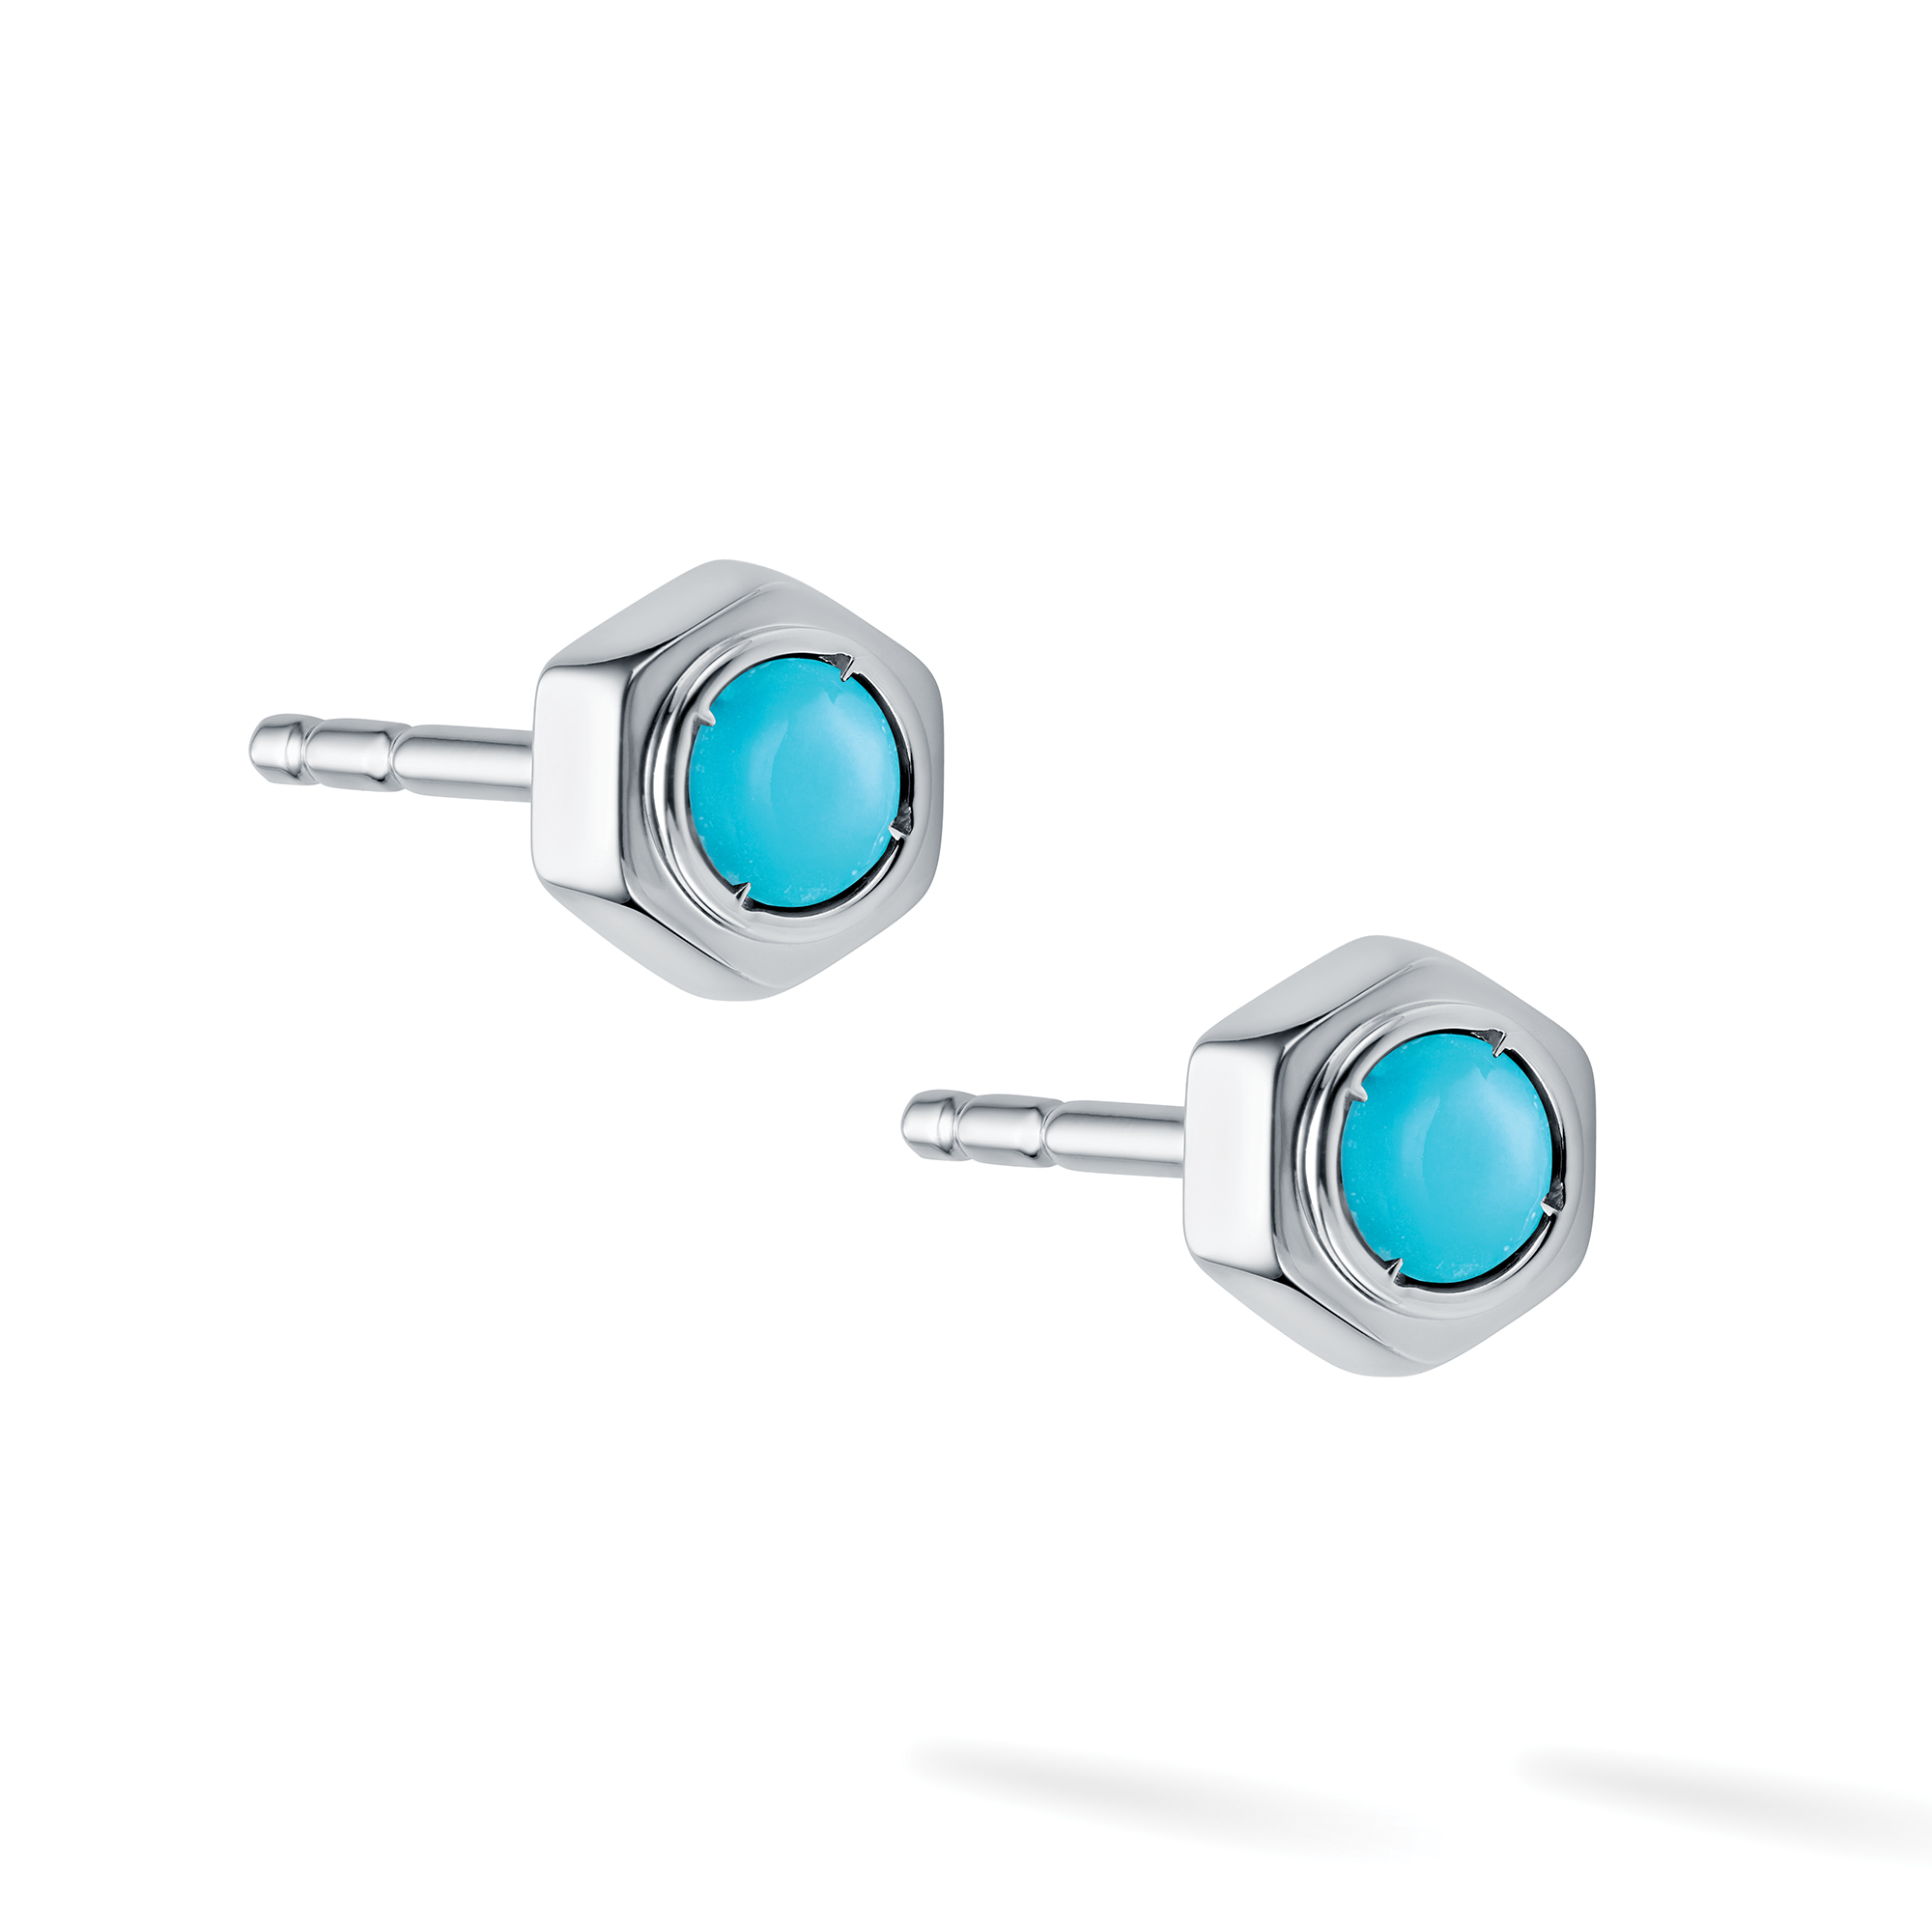 Turquoise Stud Earrings – Rocks and Gems Canada